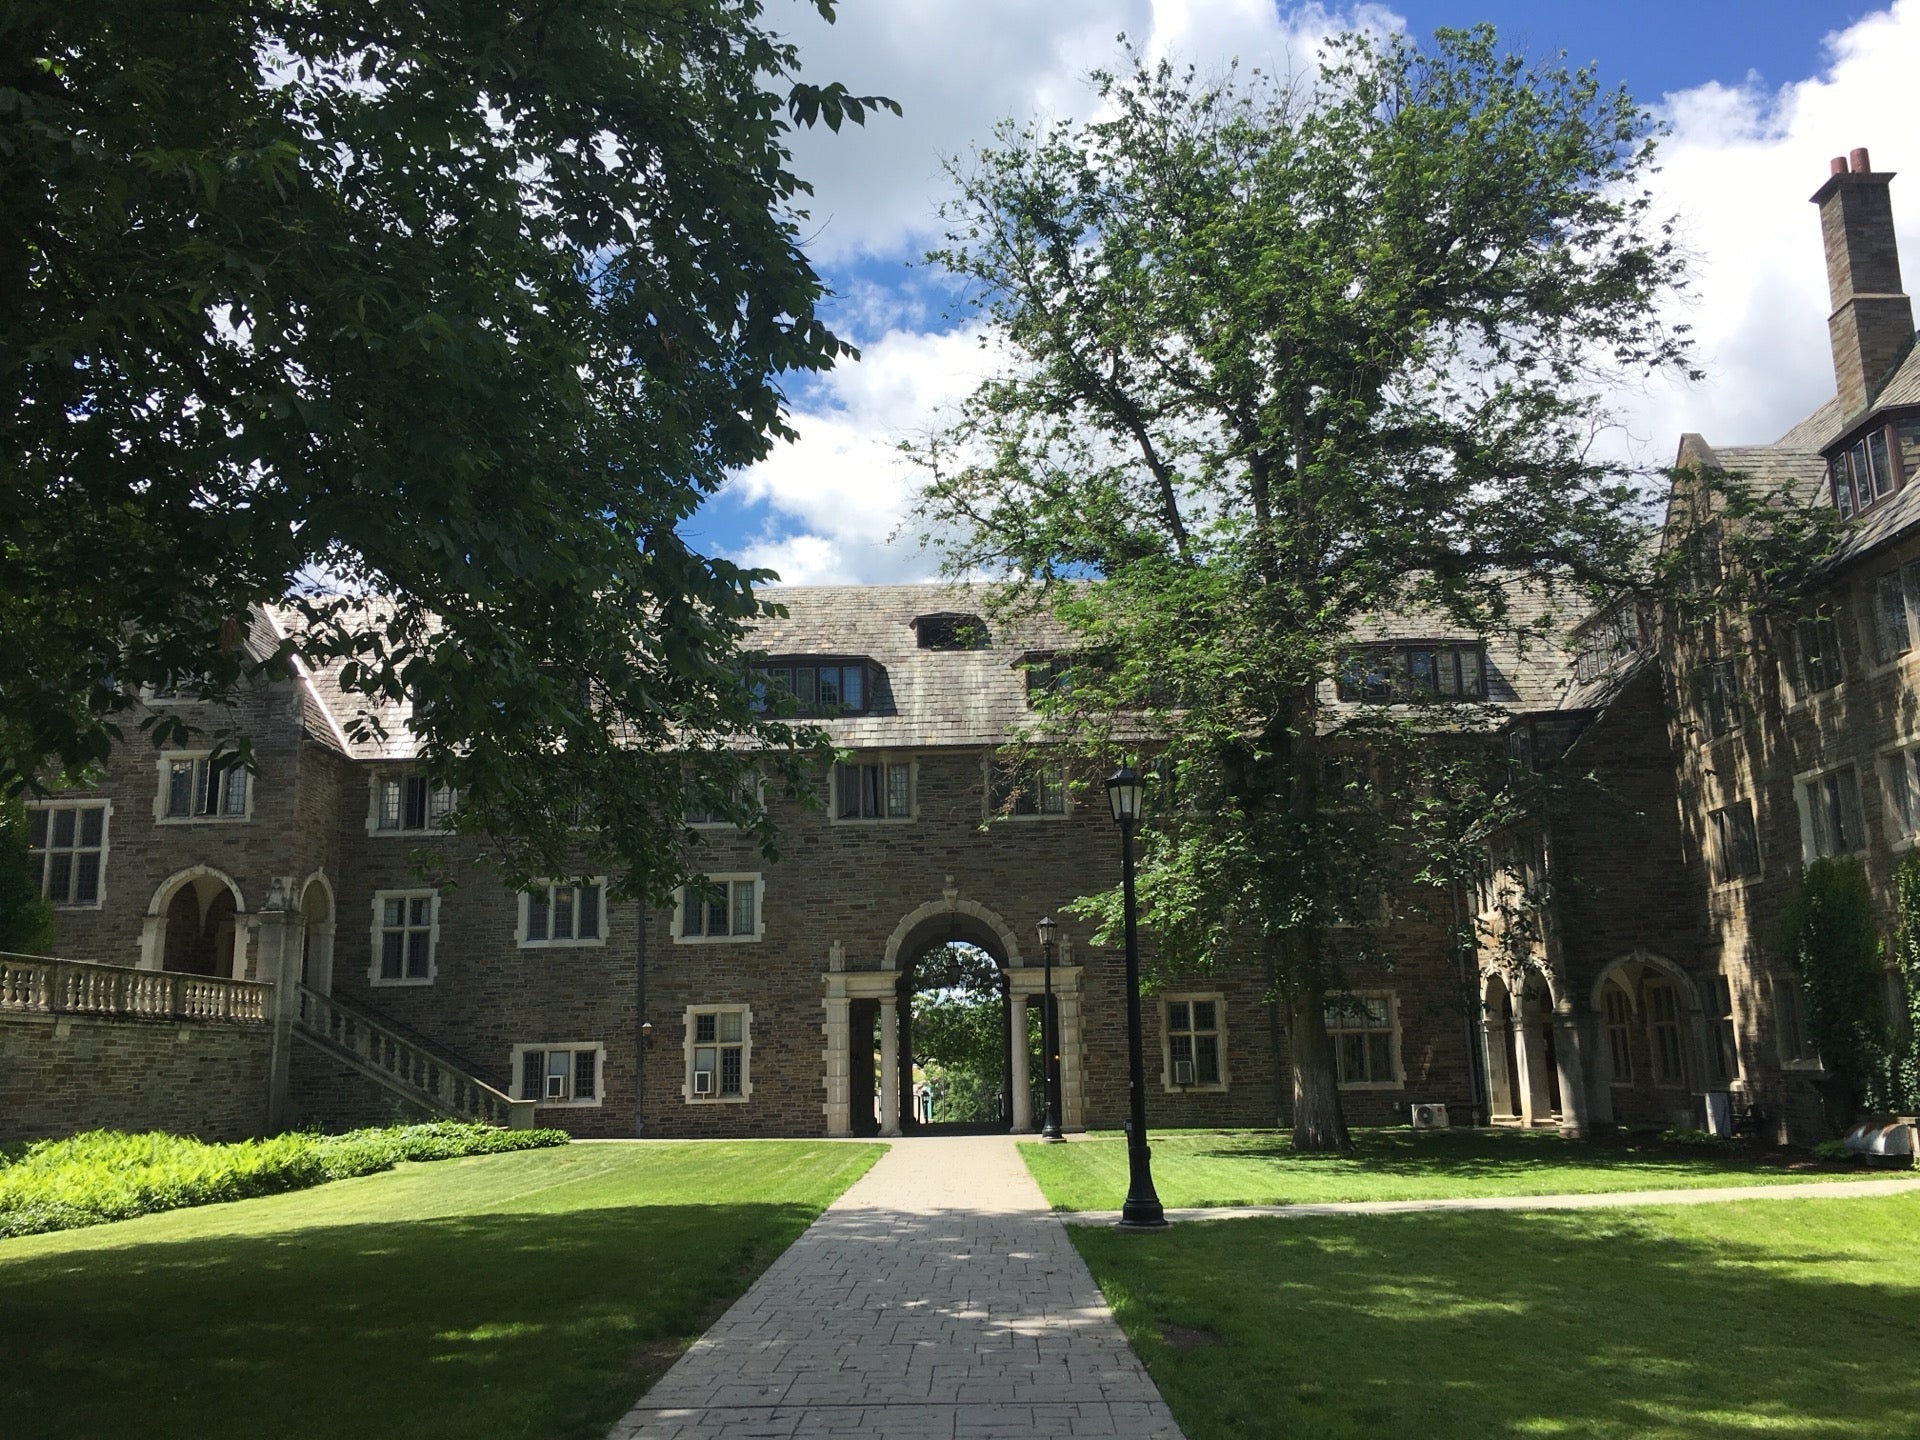 Balch Hall with a green courtyard